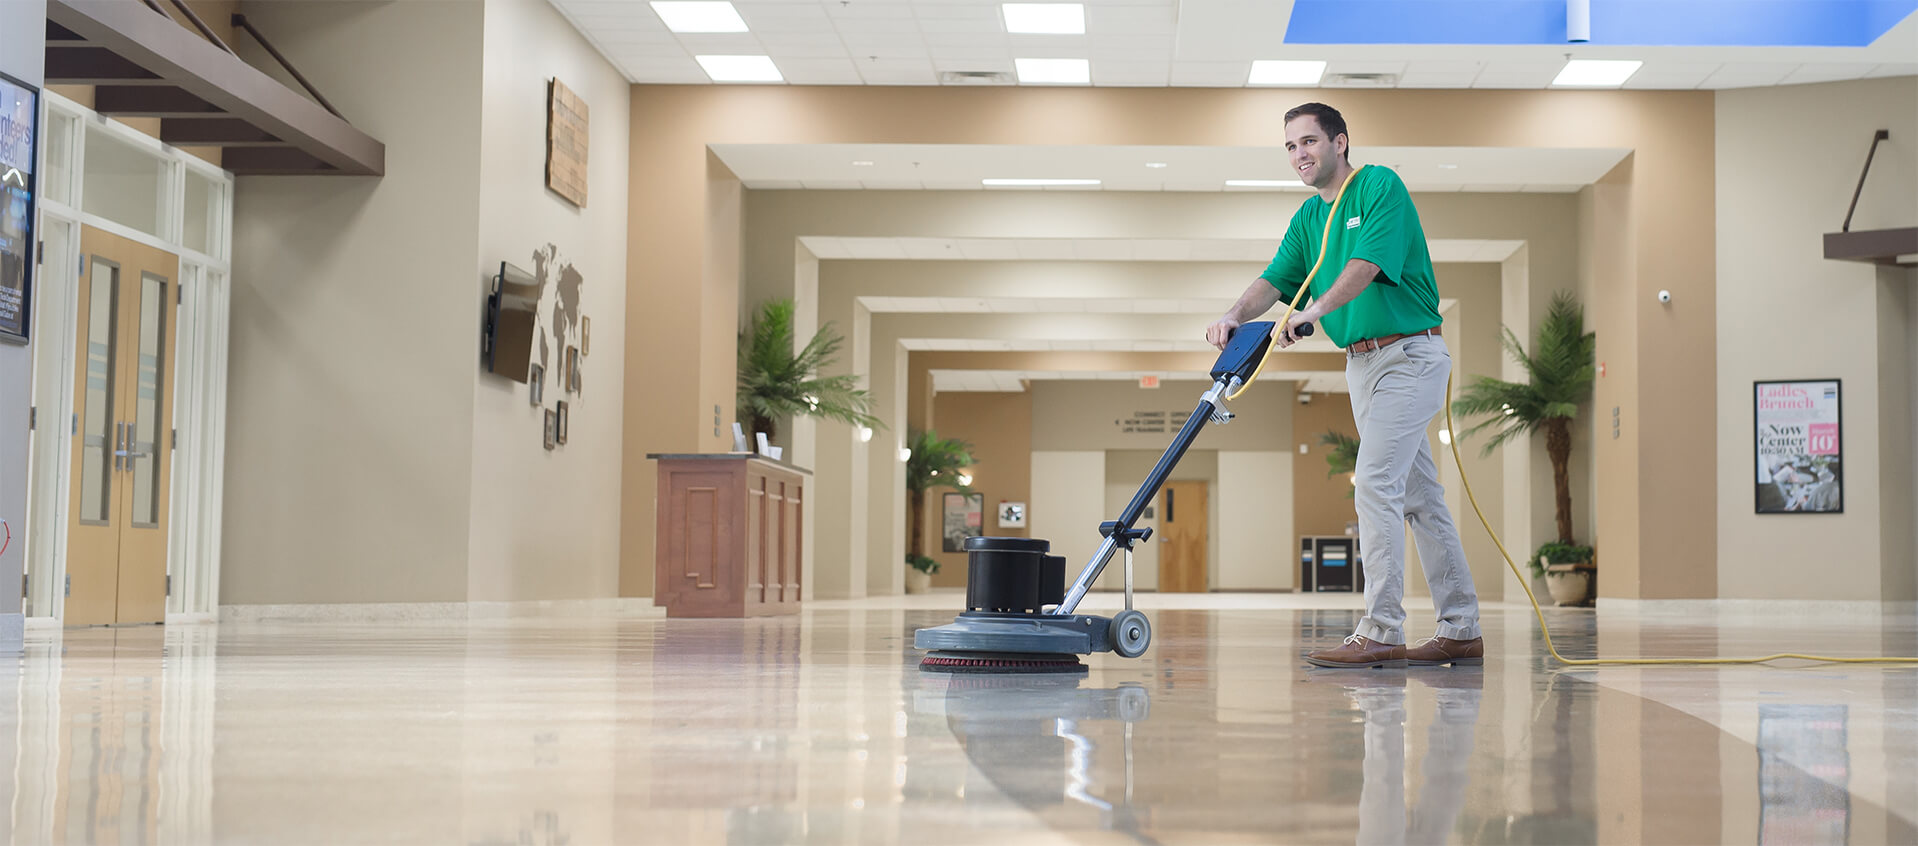 Why Choose Specialist Commercial Cleaners For Your Business